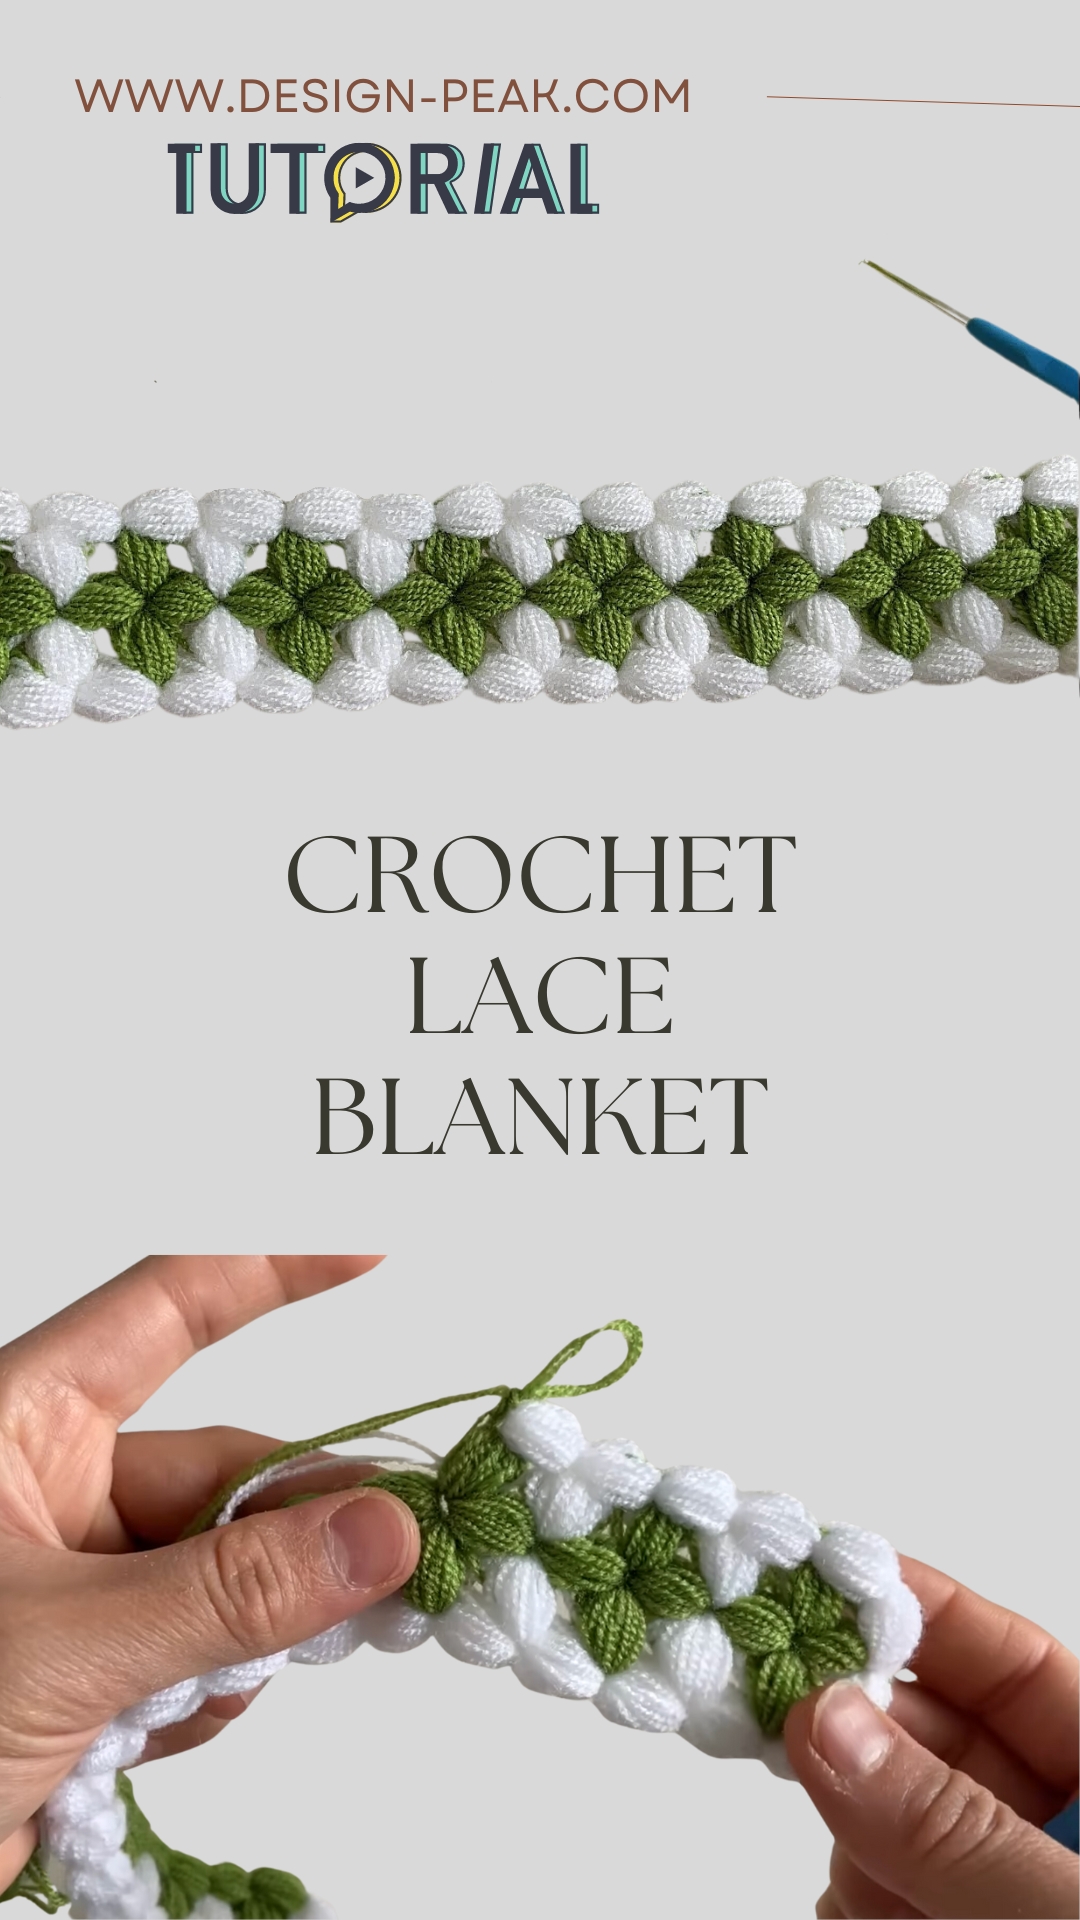 Crochet Lace into a Blanket